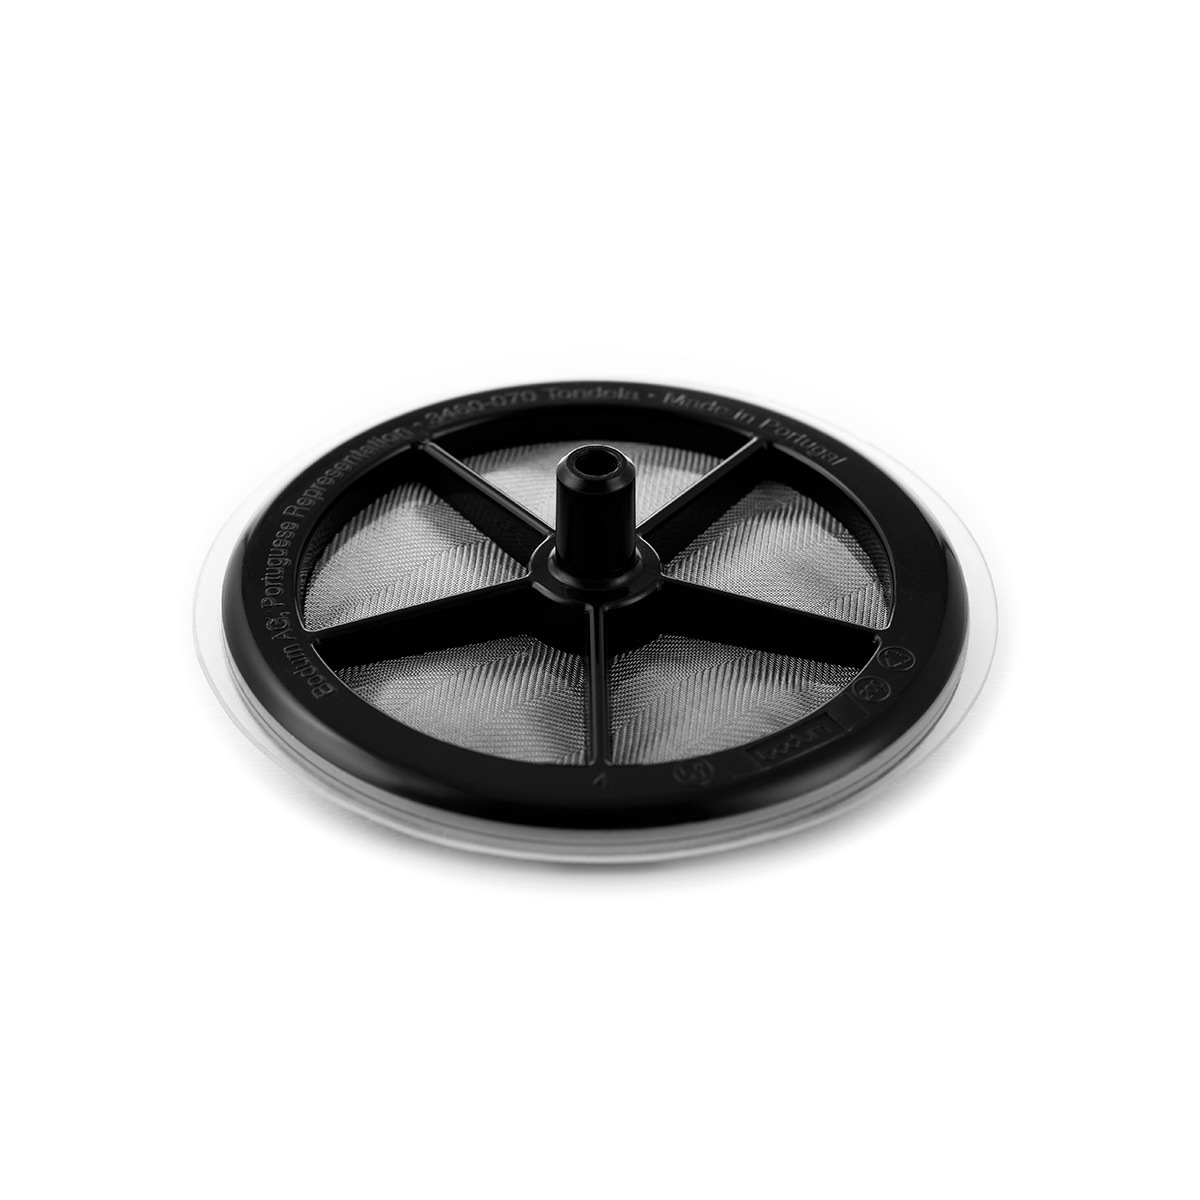 COMPONENT: Cross plate including silicone ring for coffee maker 4 cup, 0.5 l, 17 oz - 8 cup, 1.0 l, 34 oz